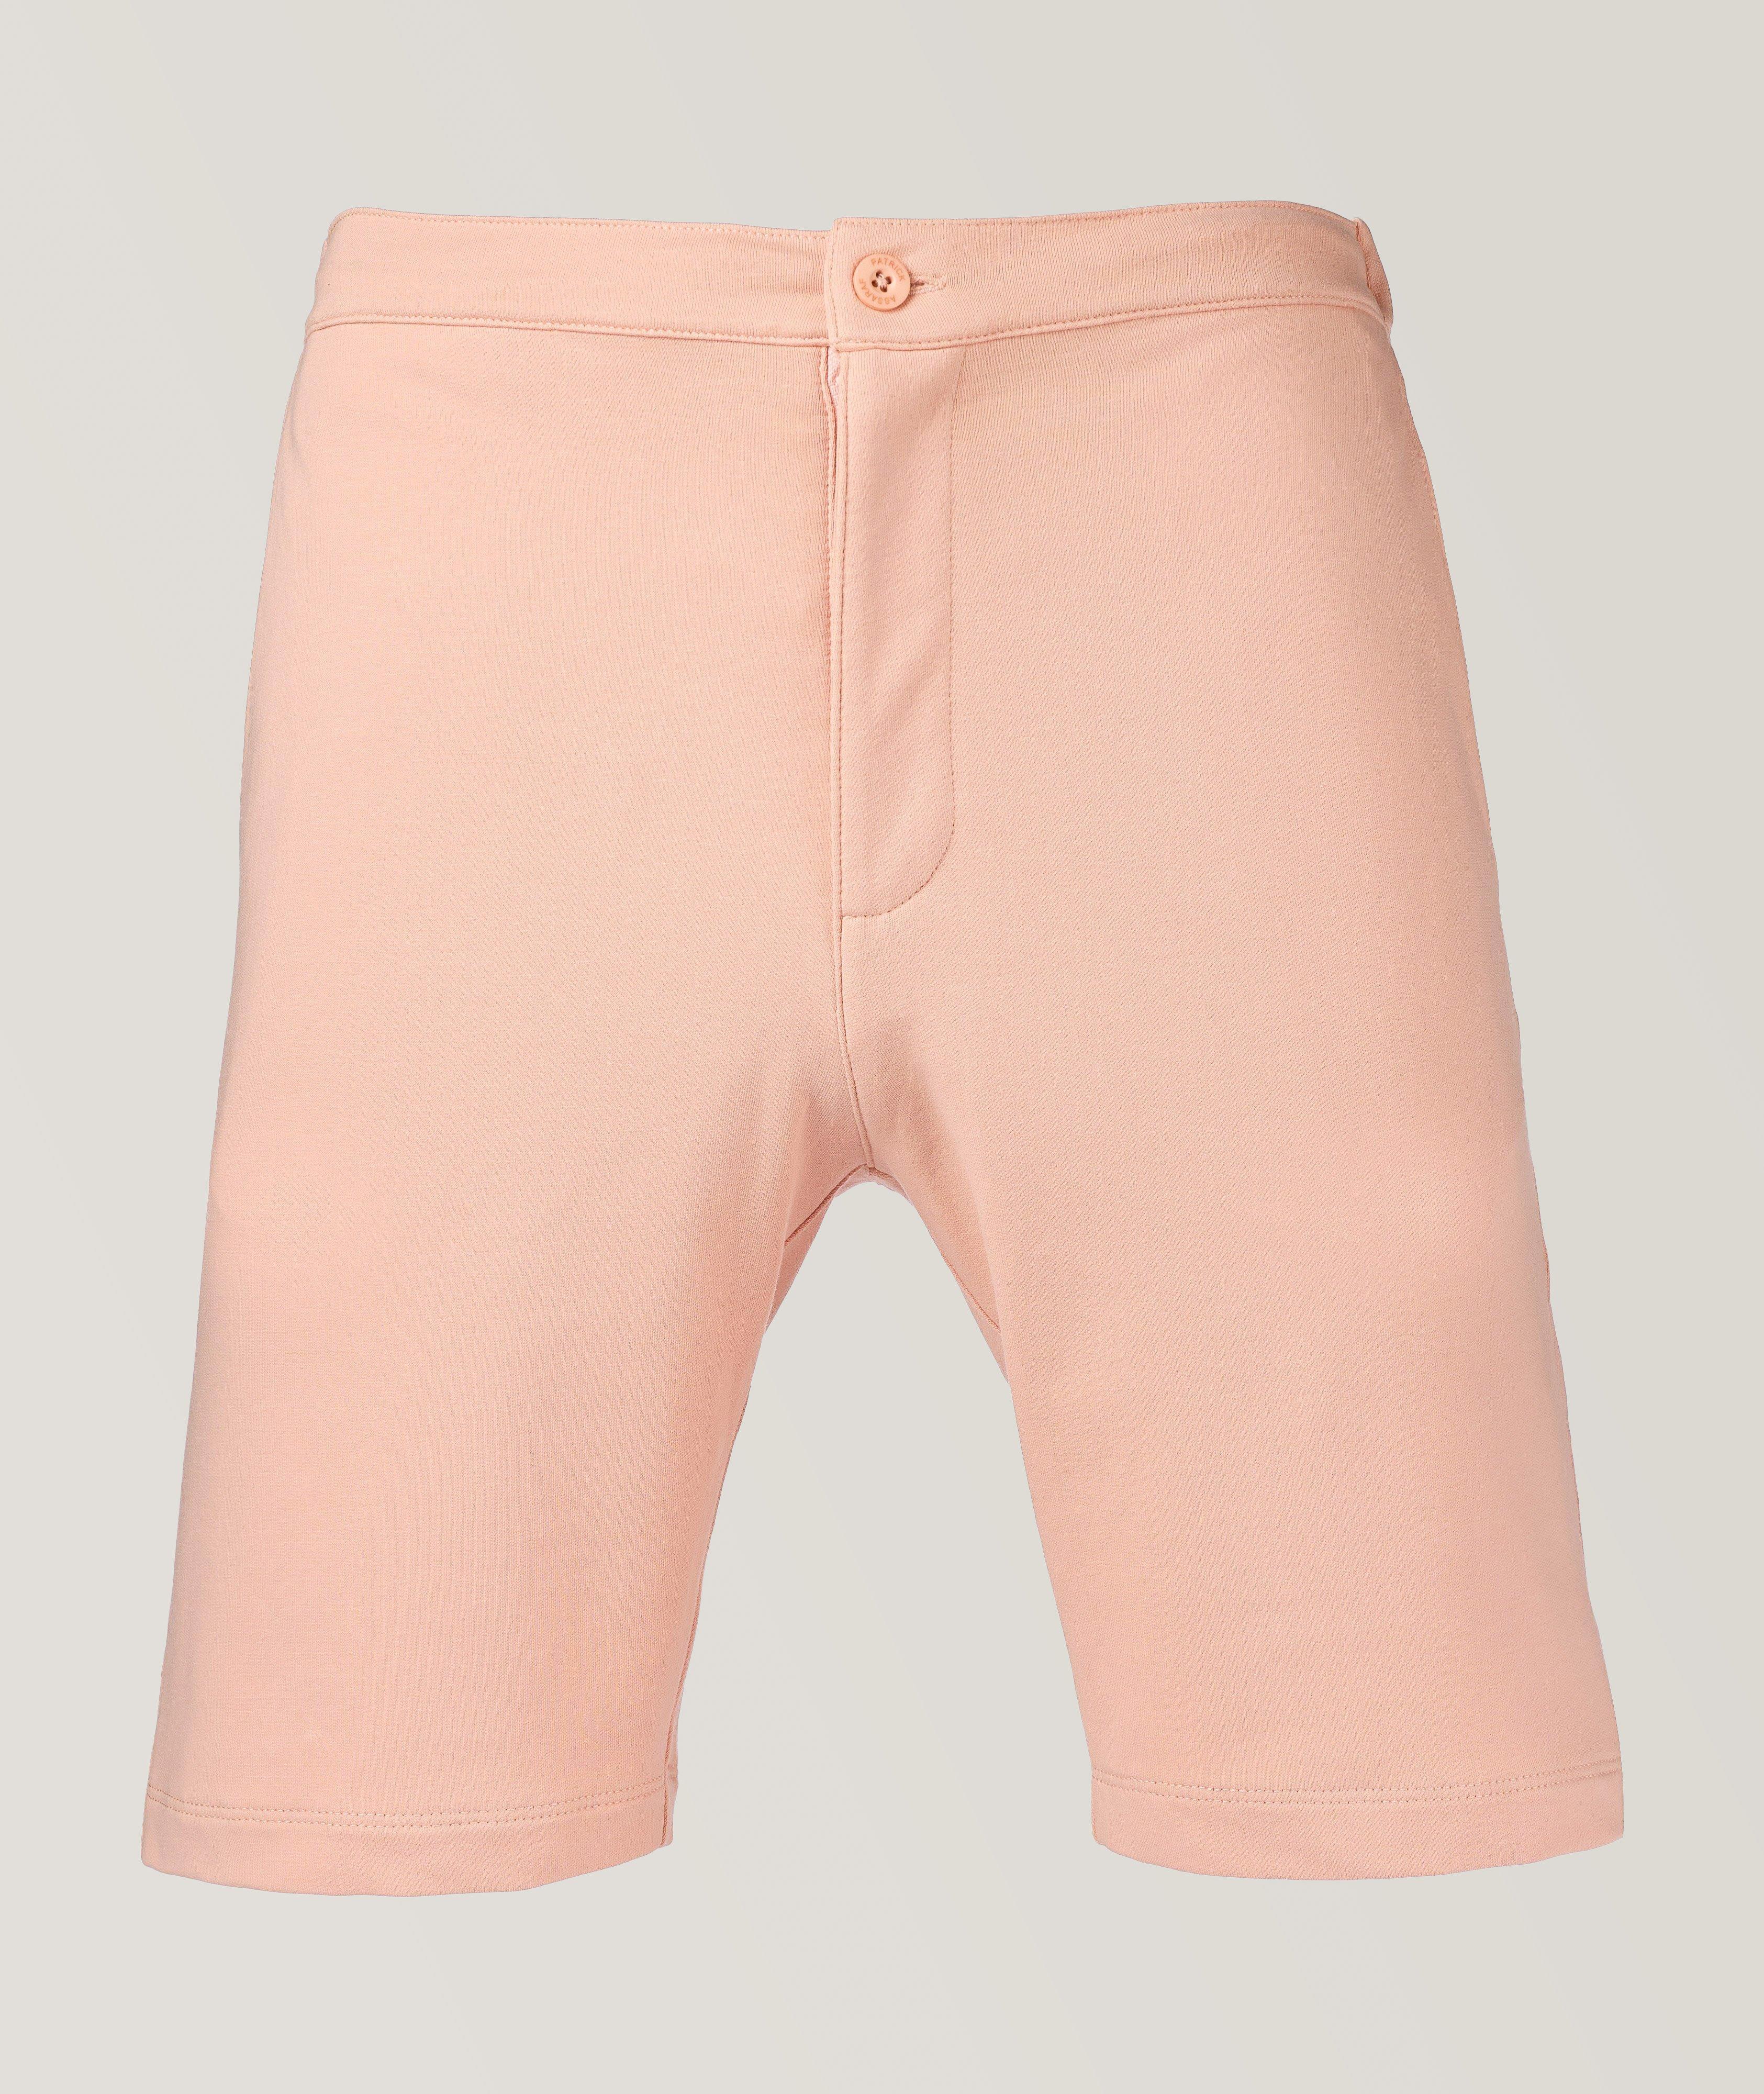 Pima Cotton Stretch French Terry Shorts image 0